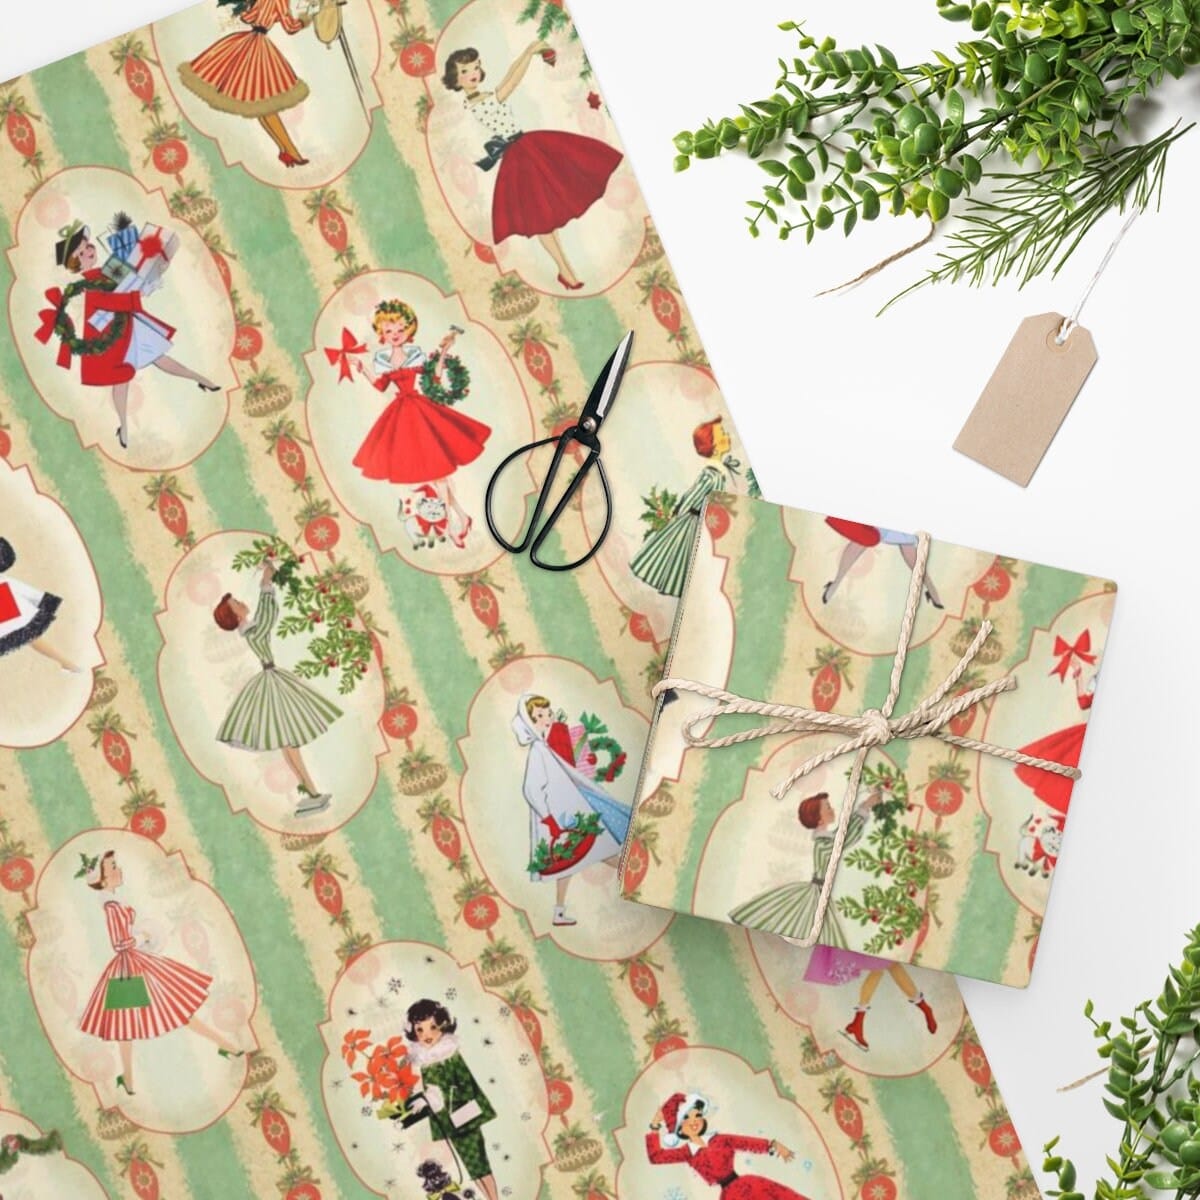 Vintage 1950s Christmas Wrapping Paper, Mid Century Modern Retro